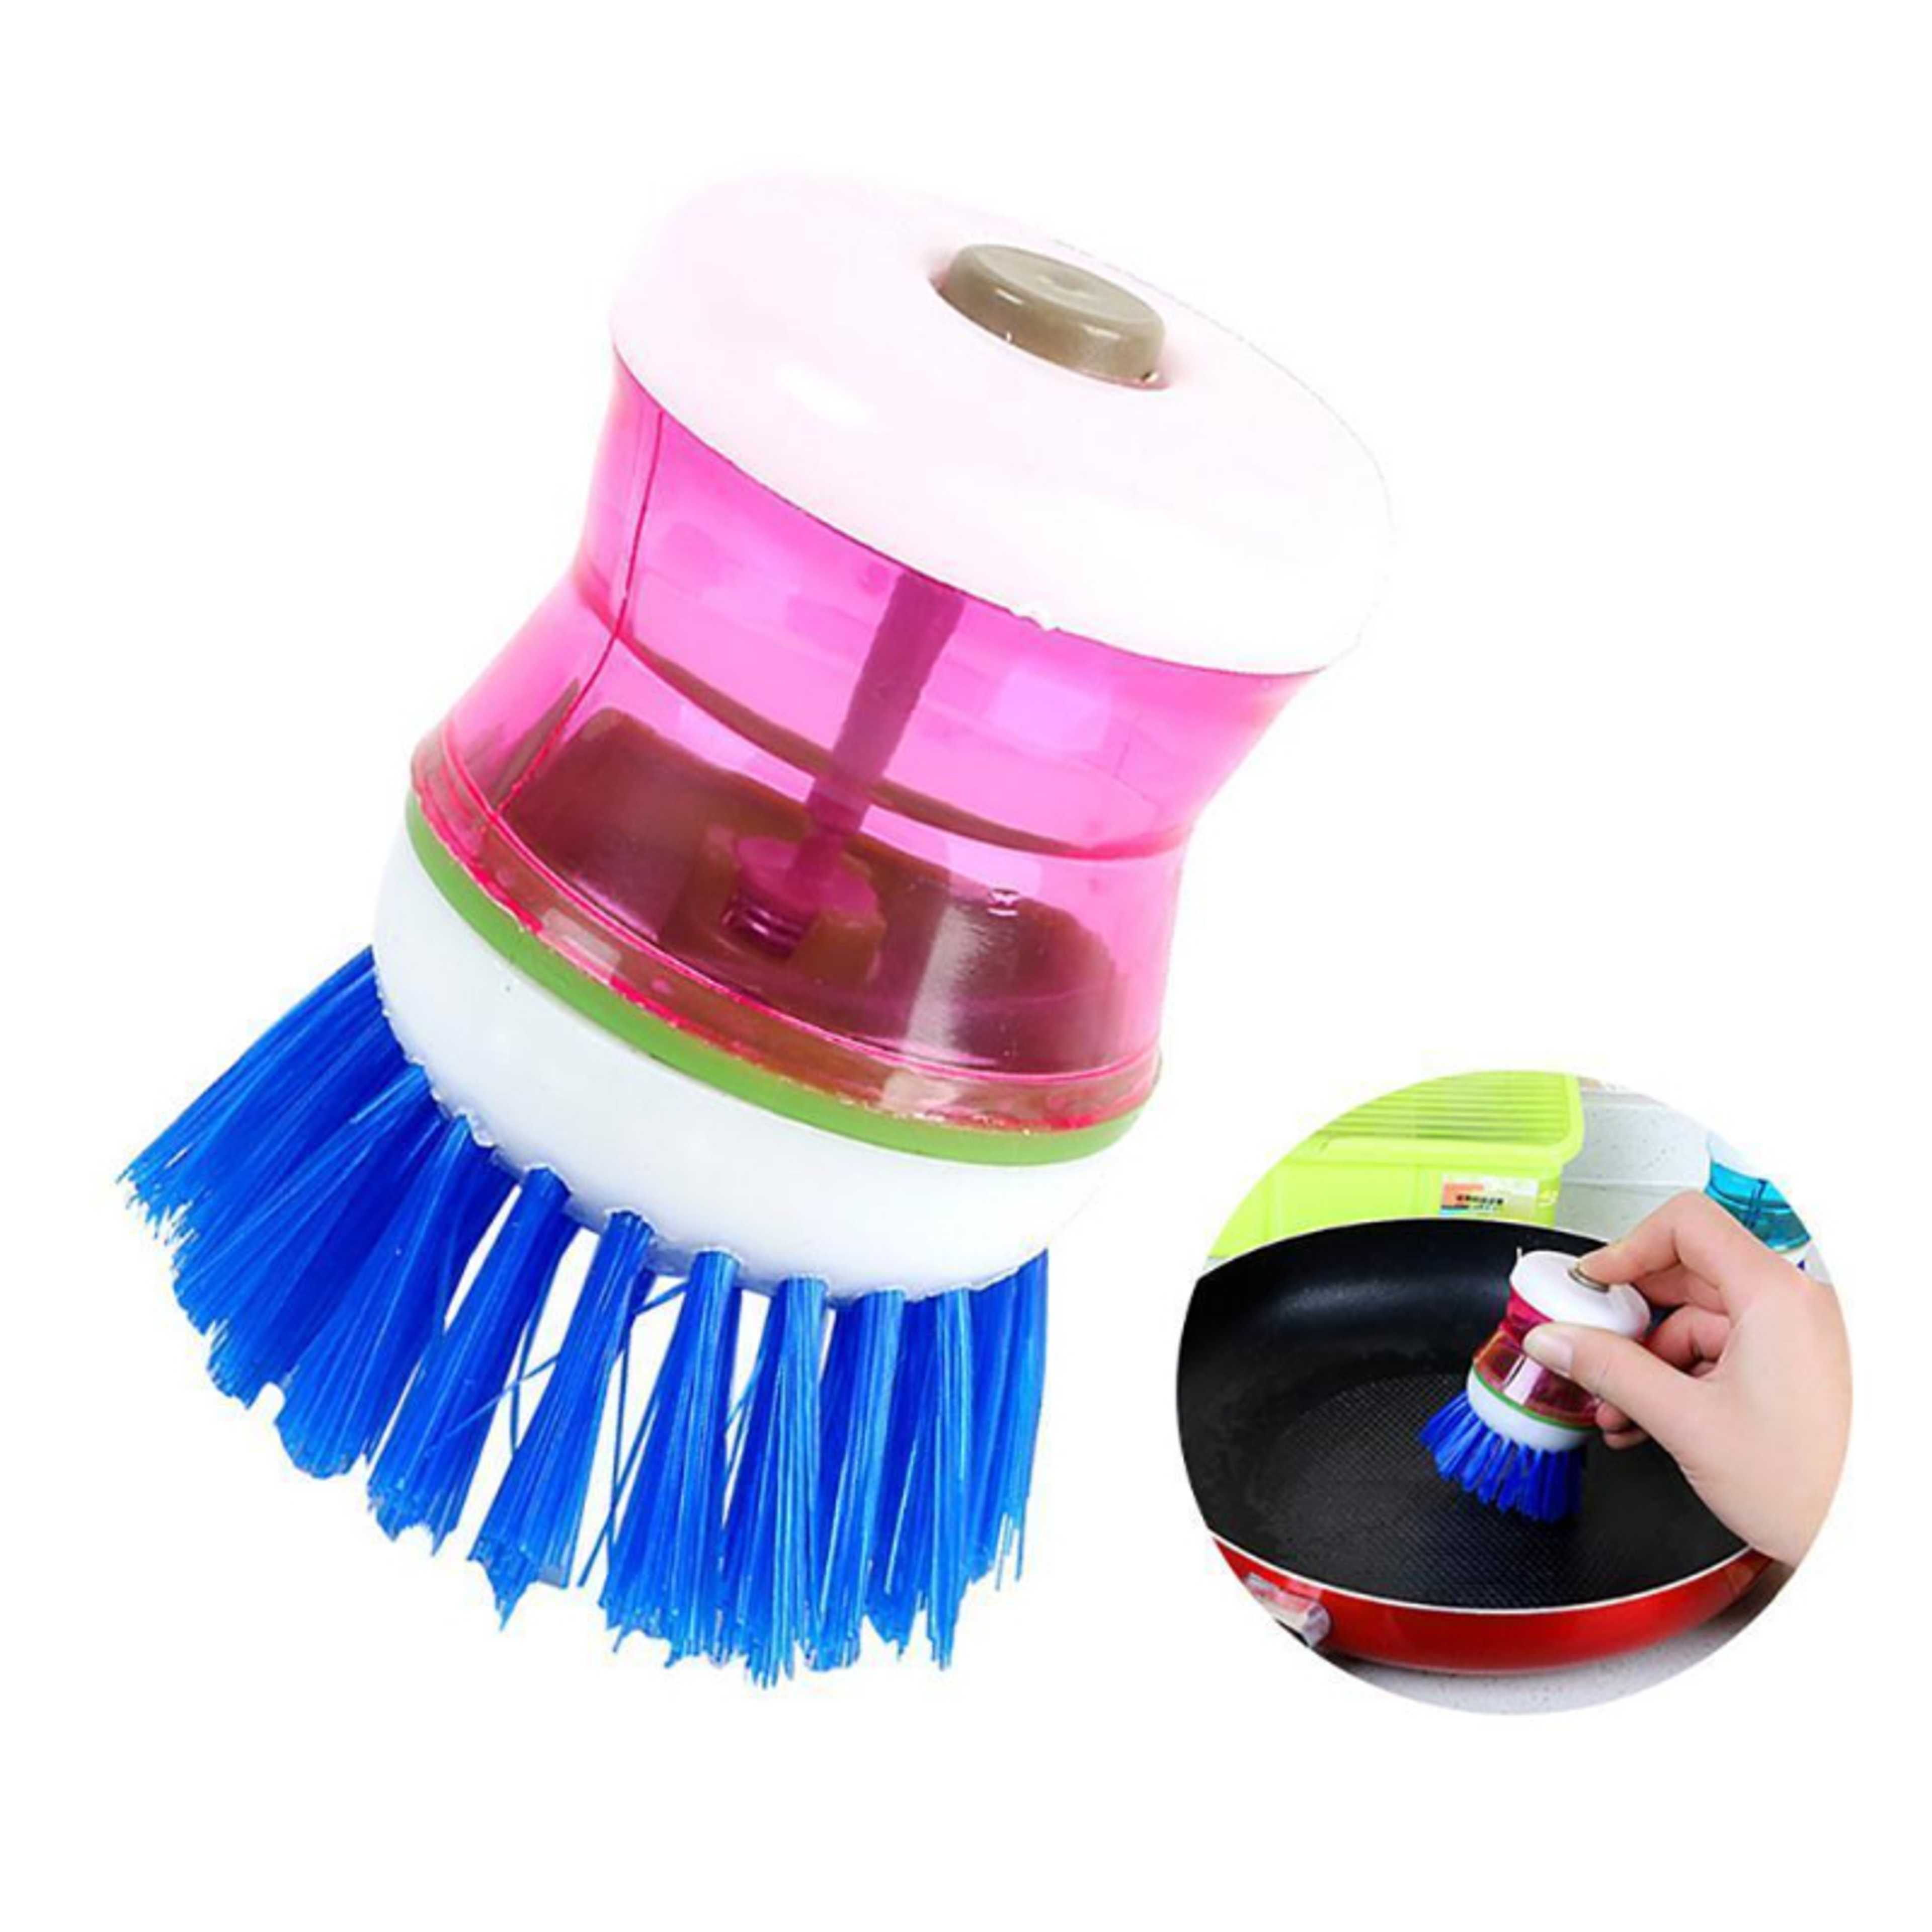 Love Pakistan Cleaning Brush with Soap Dispenser for Kitchen, Sink, Dish Washer (Multicolor)1 Pcs